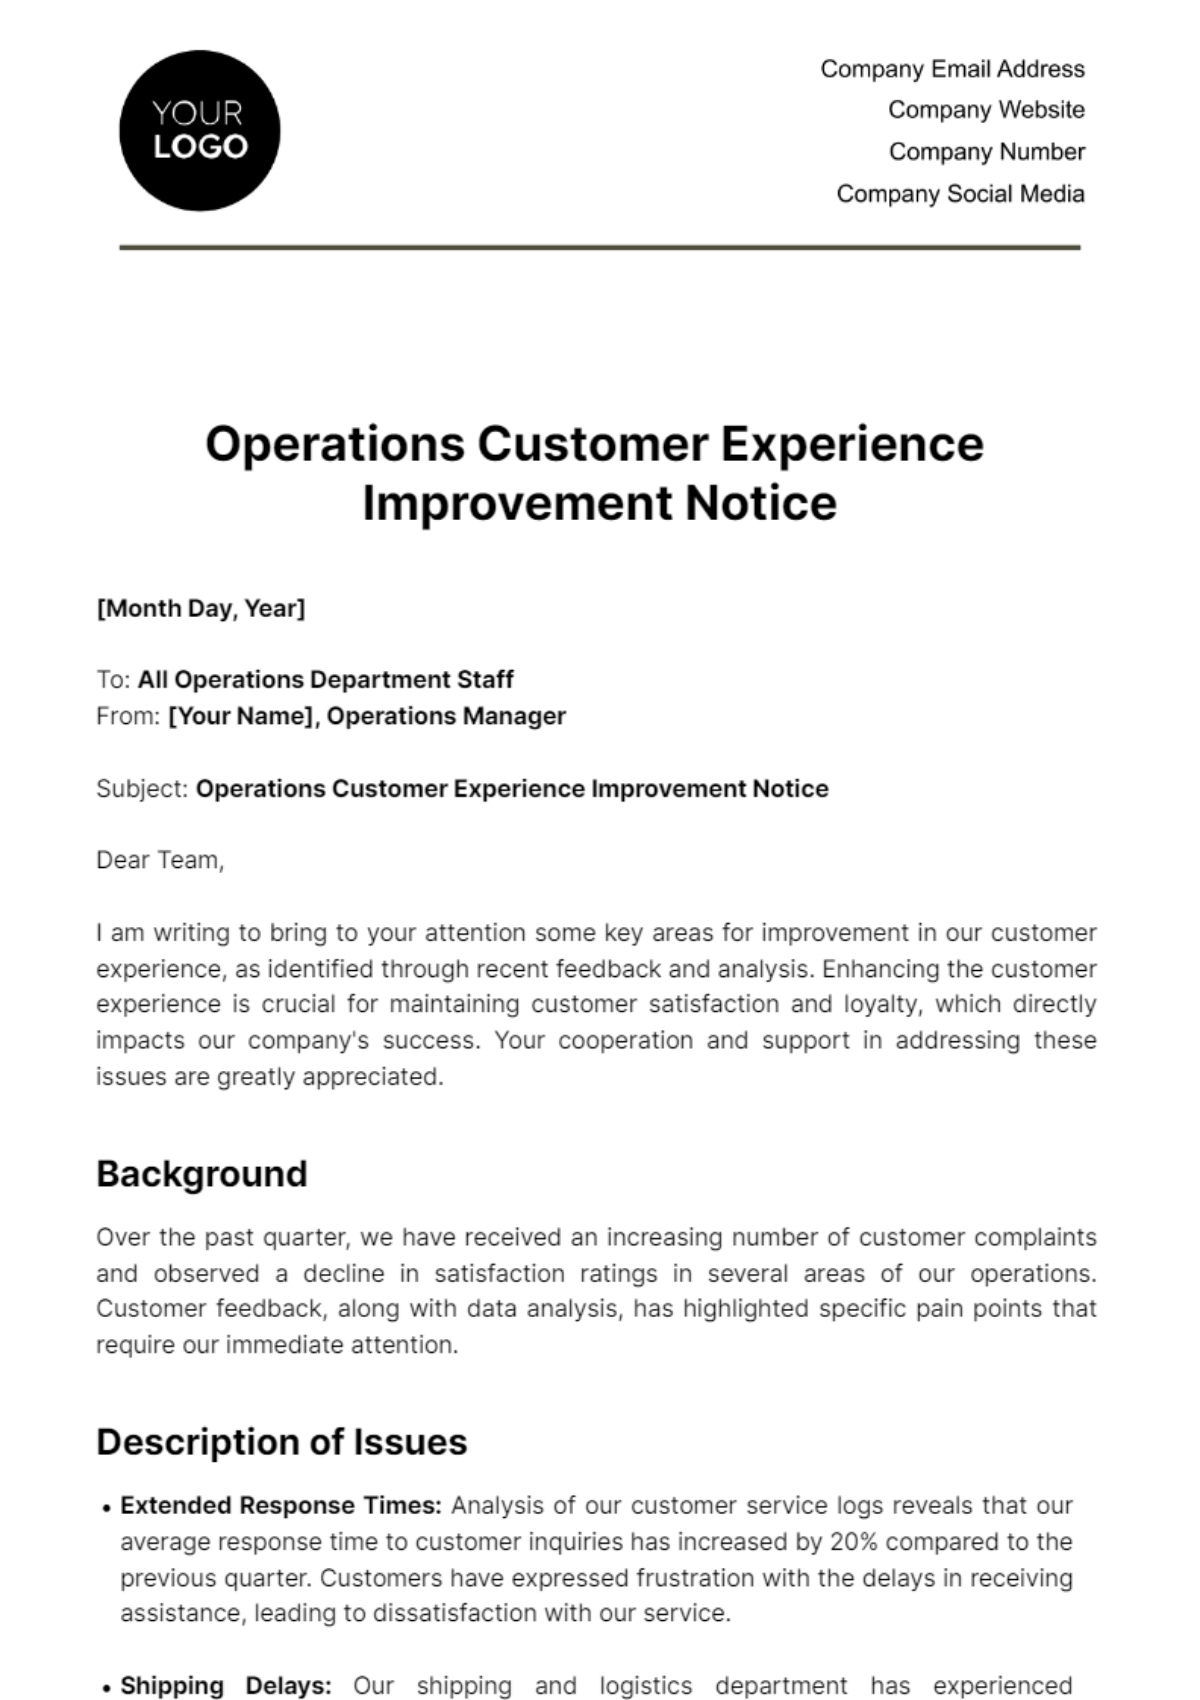 Free Operations Customer Experience Improvement Notice Template